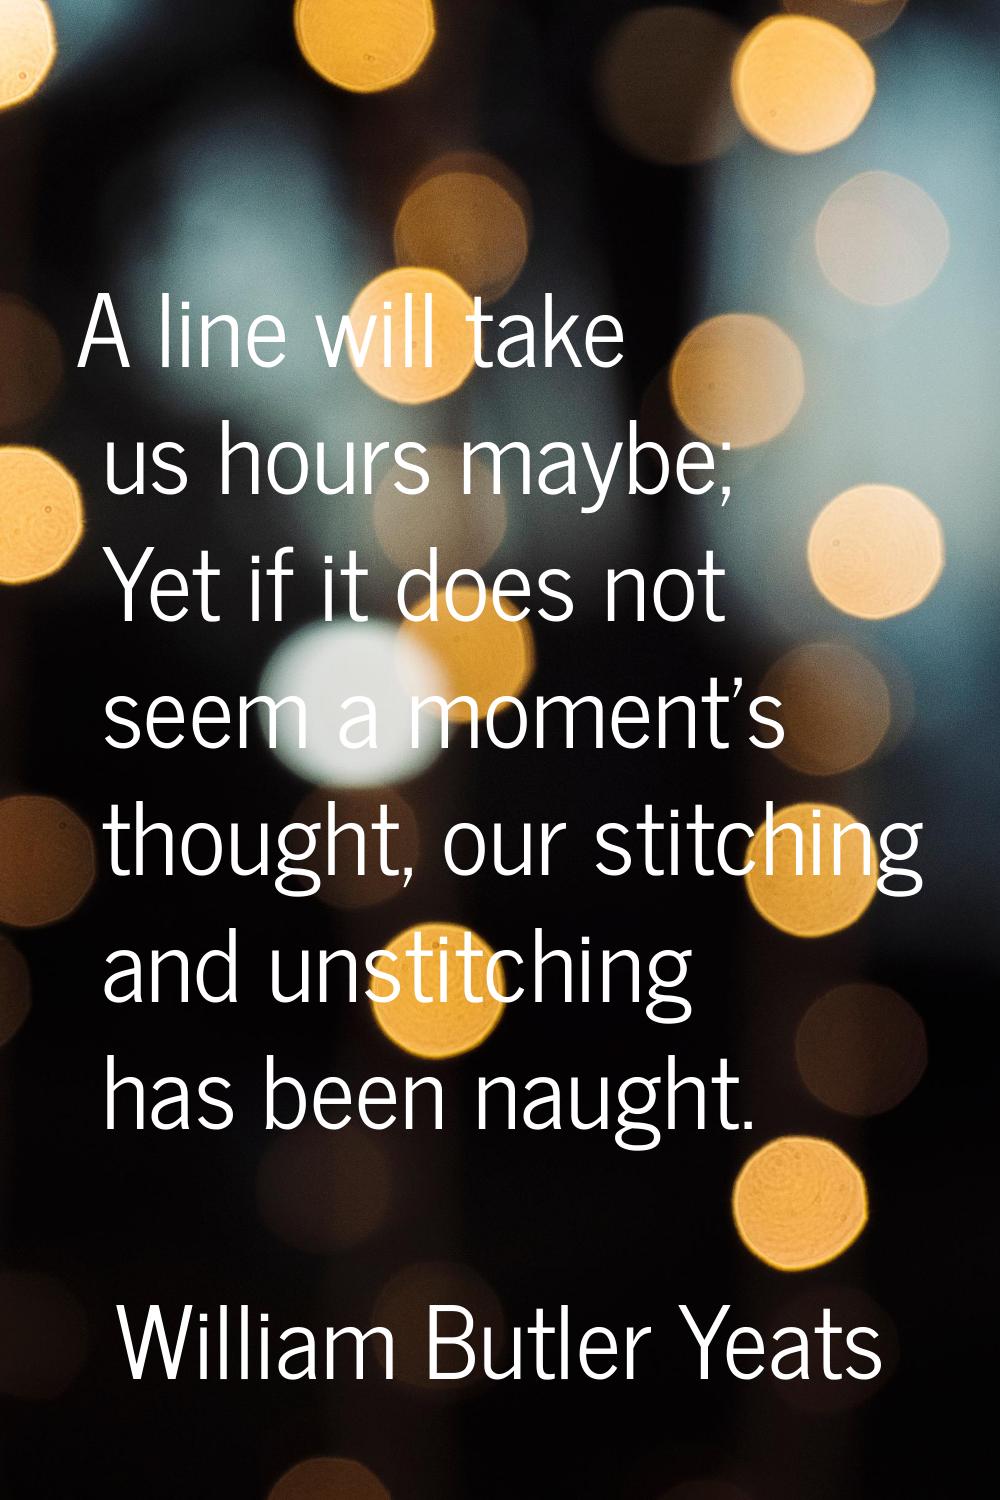 A line will take us hours maybe; Yet if it does not seem a moment's thought, our stitching and unst